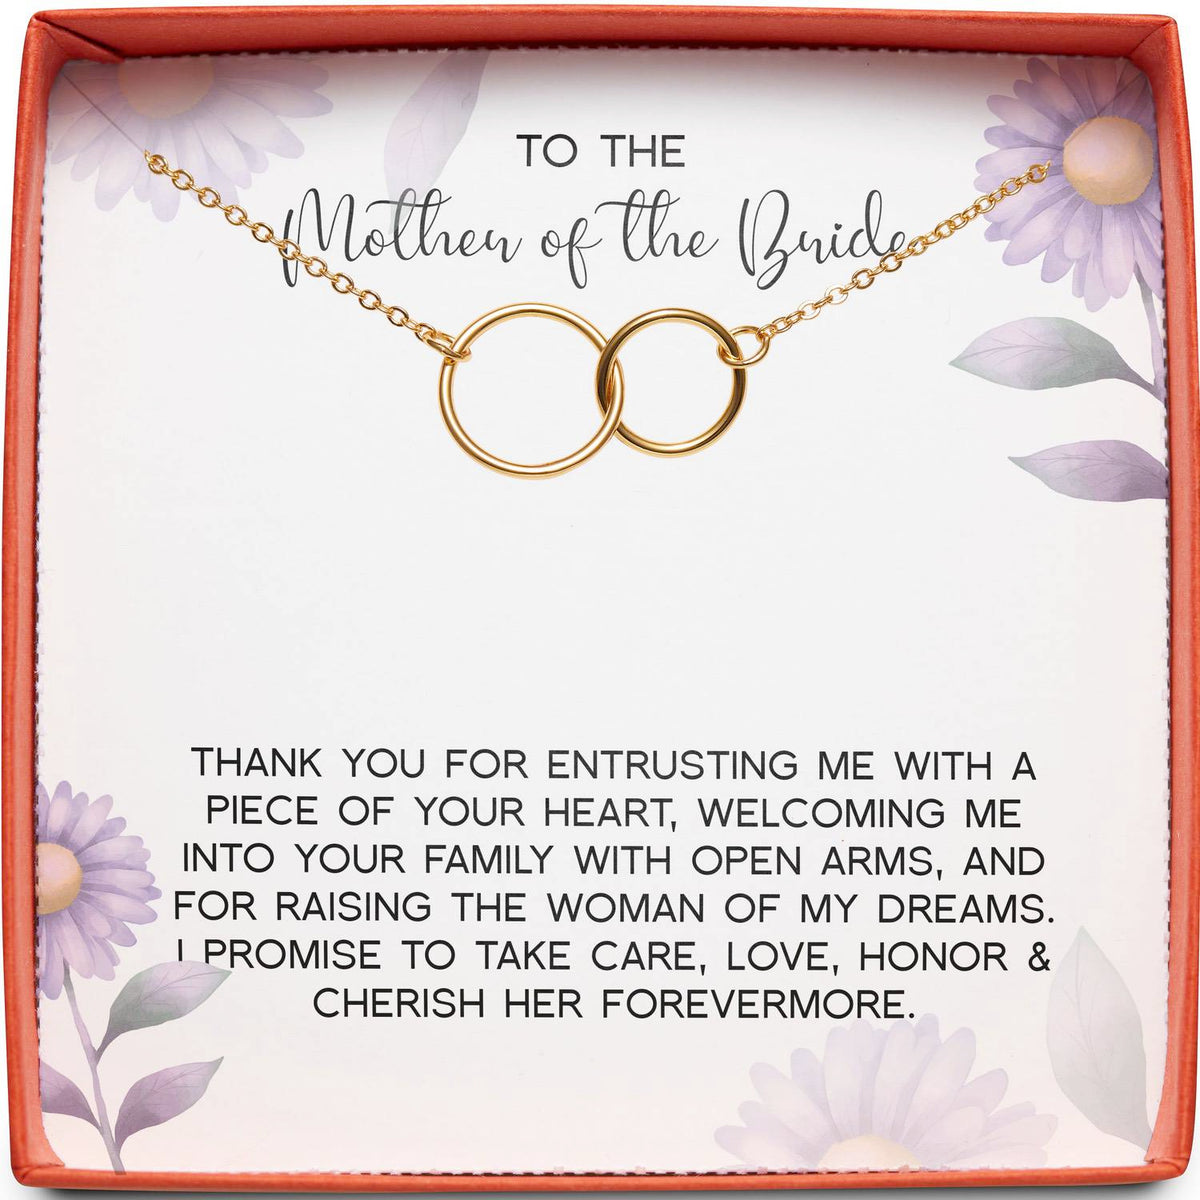 To The Mother of the Bride (From Groom) | Piece of Your Heart | Interlocking Circles